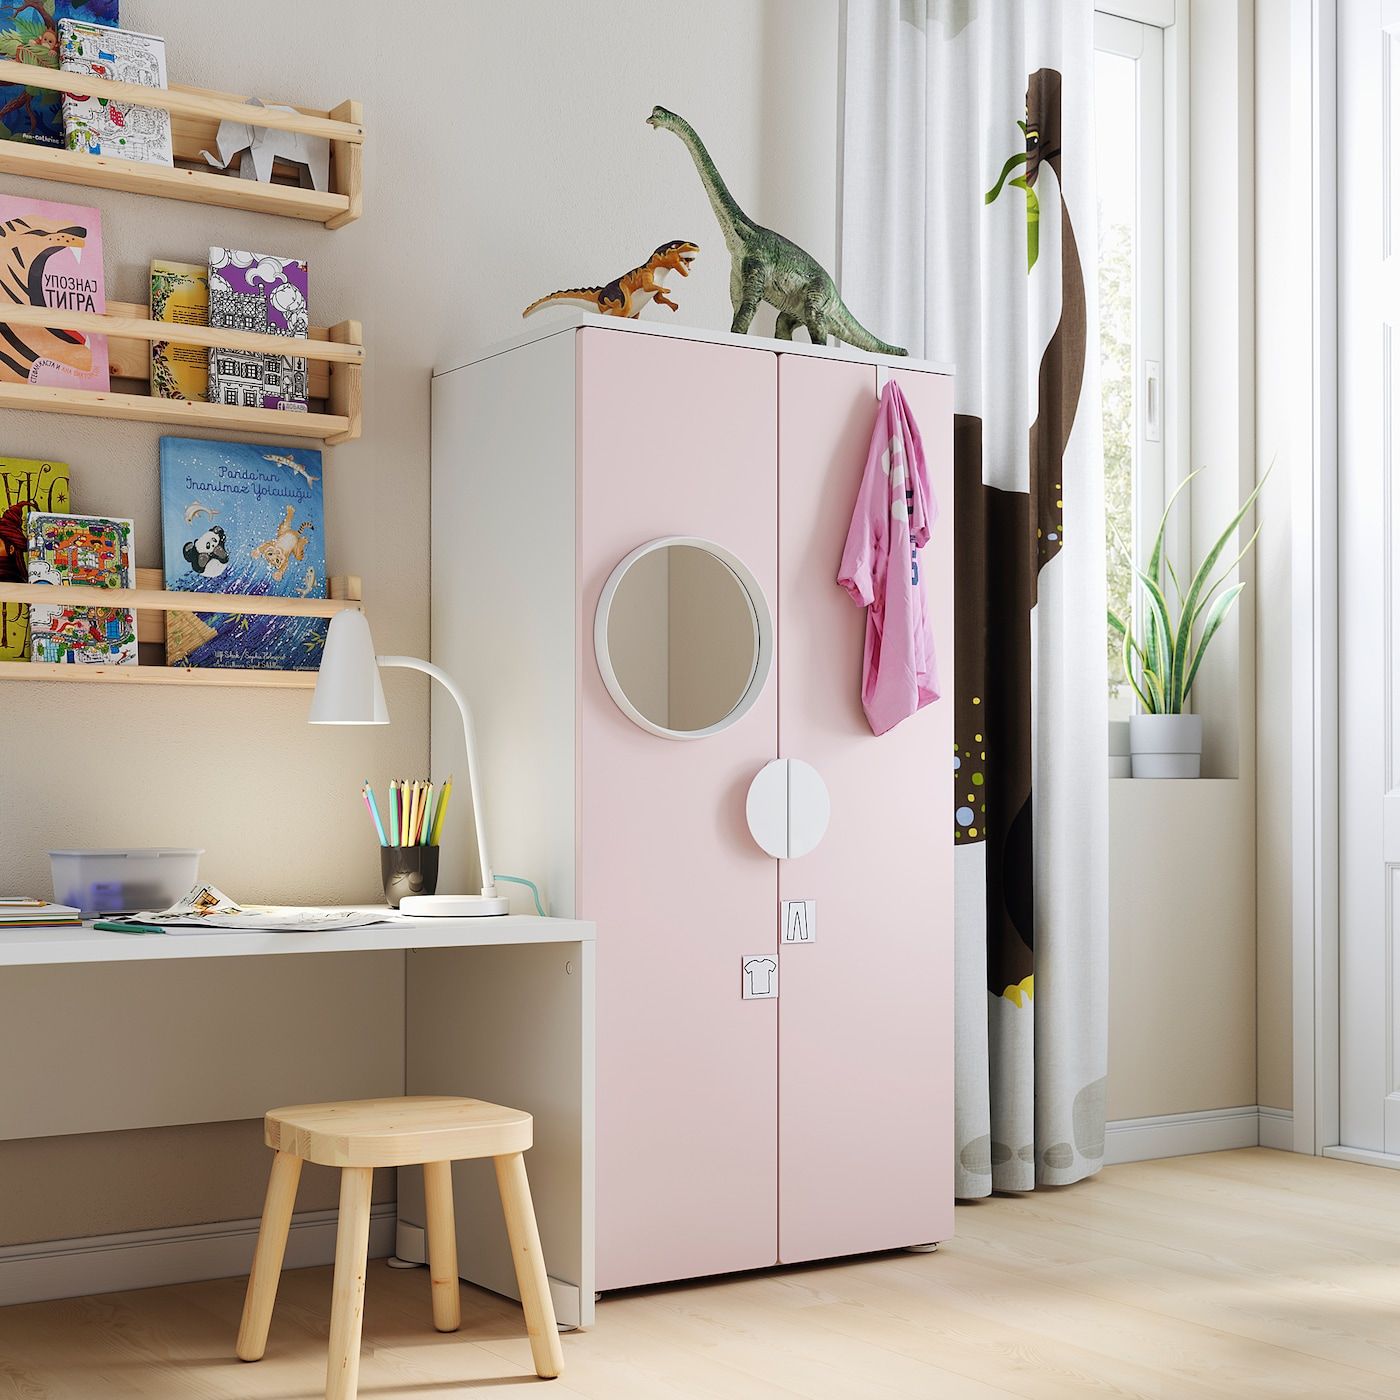 Småstad Wardrobe, White/pale Pink, 60x42x123 Cm – Ikea With Childrens Pink Wardrobes (View 5 of 15)